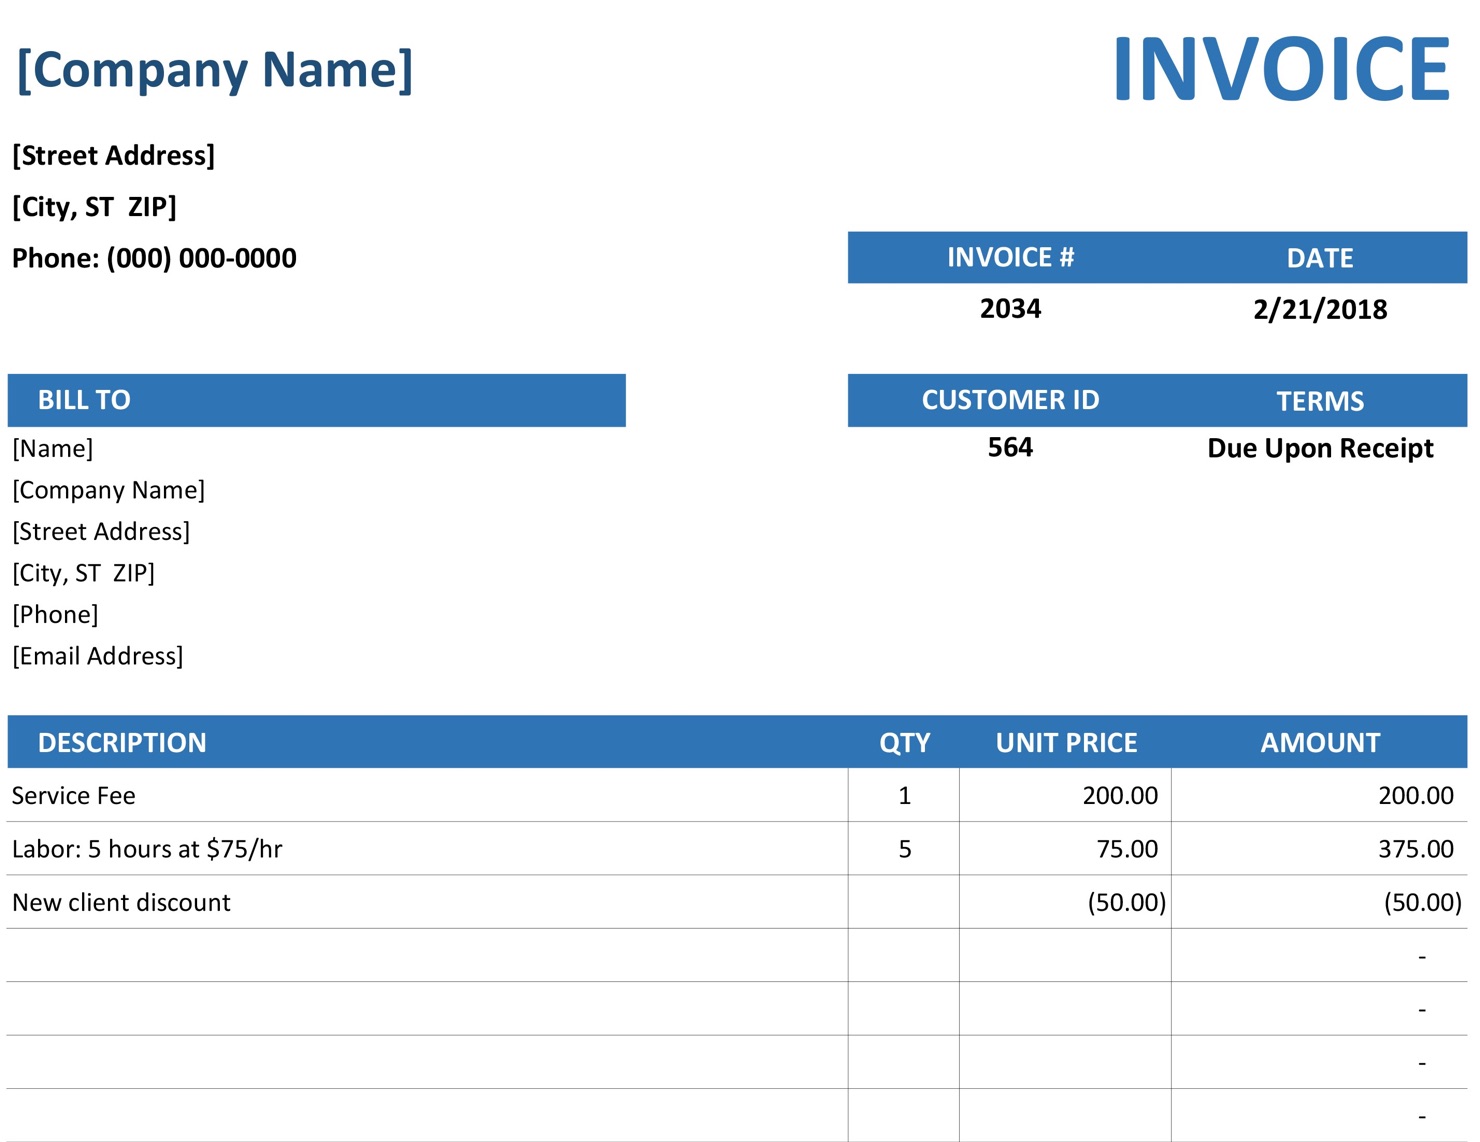 How to create an invoice quickly